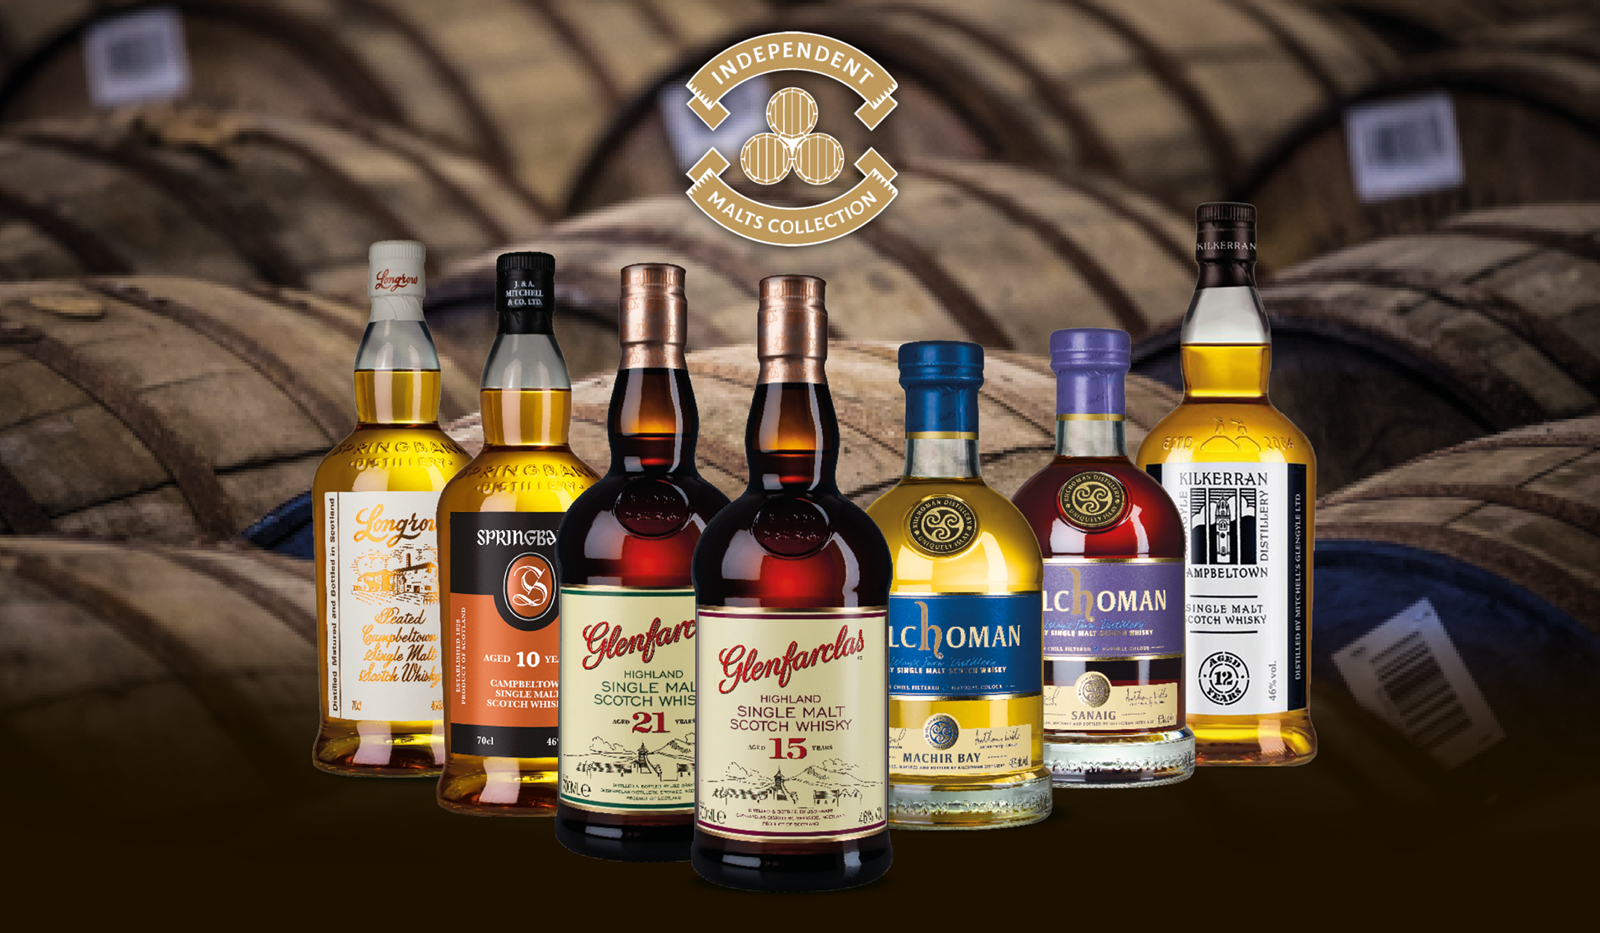 The Independent Malts Collection